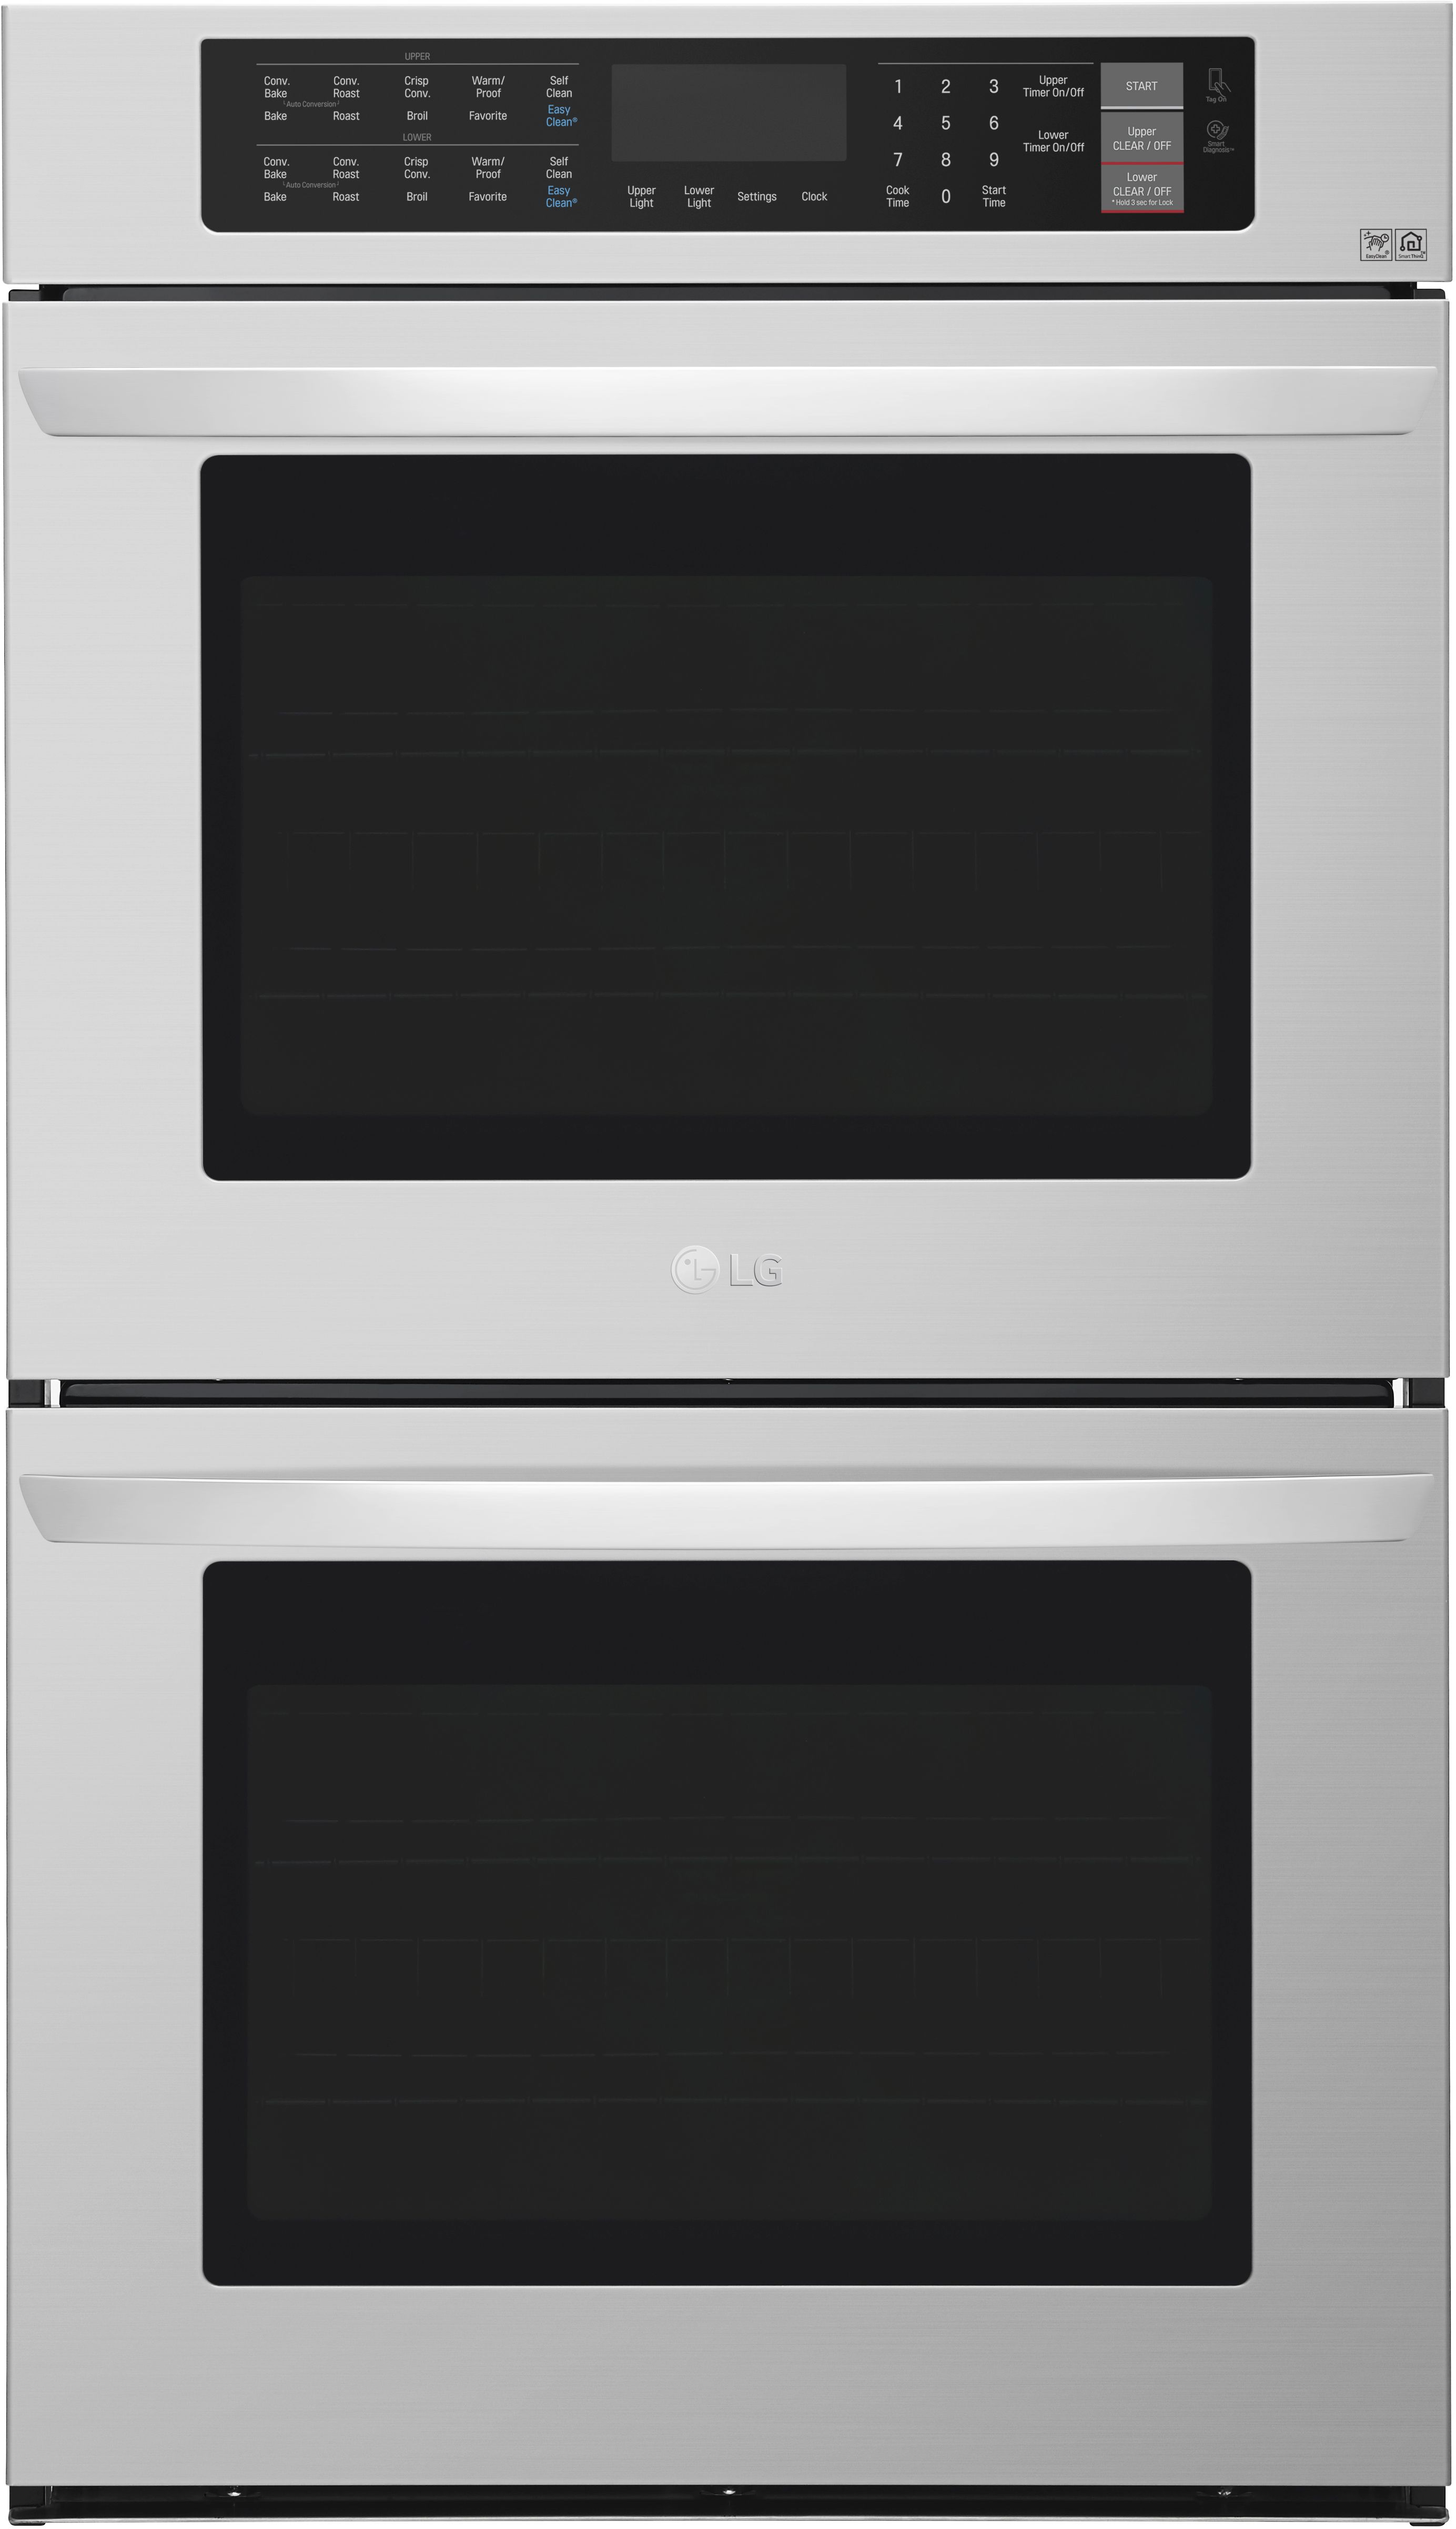 LG 30" Stainless Steel Electric Built In Double Oven